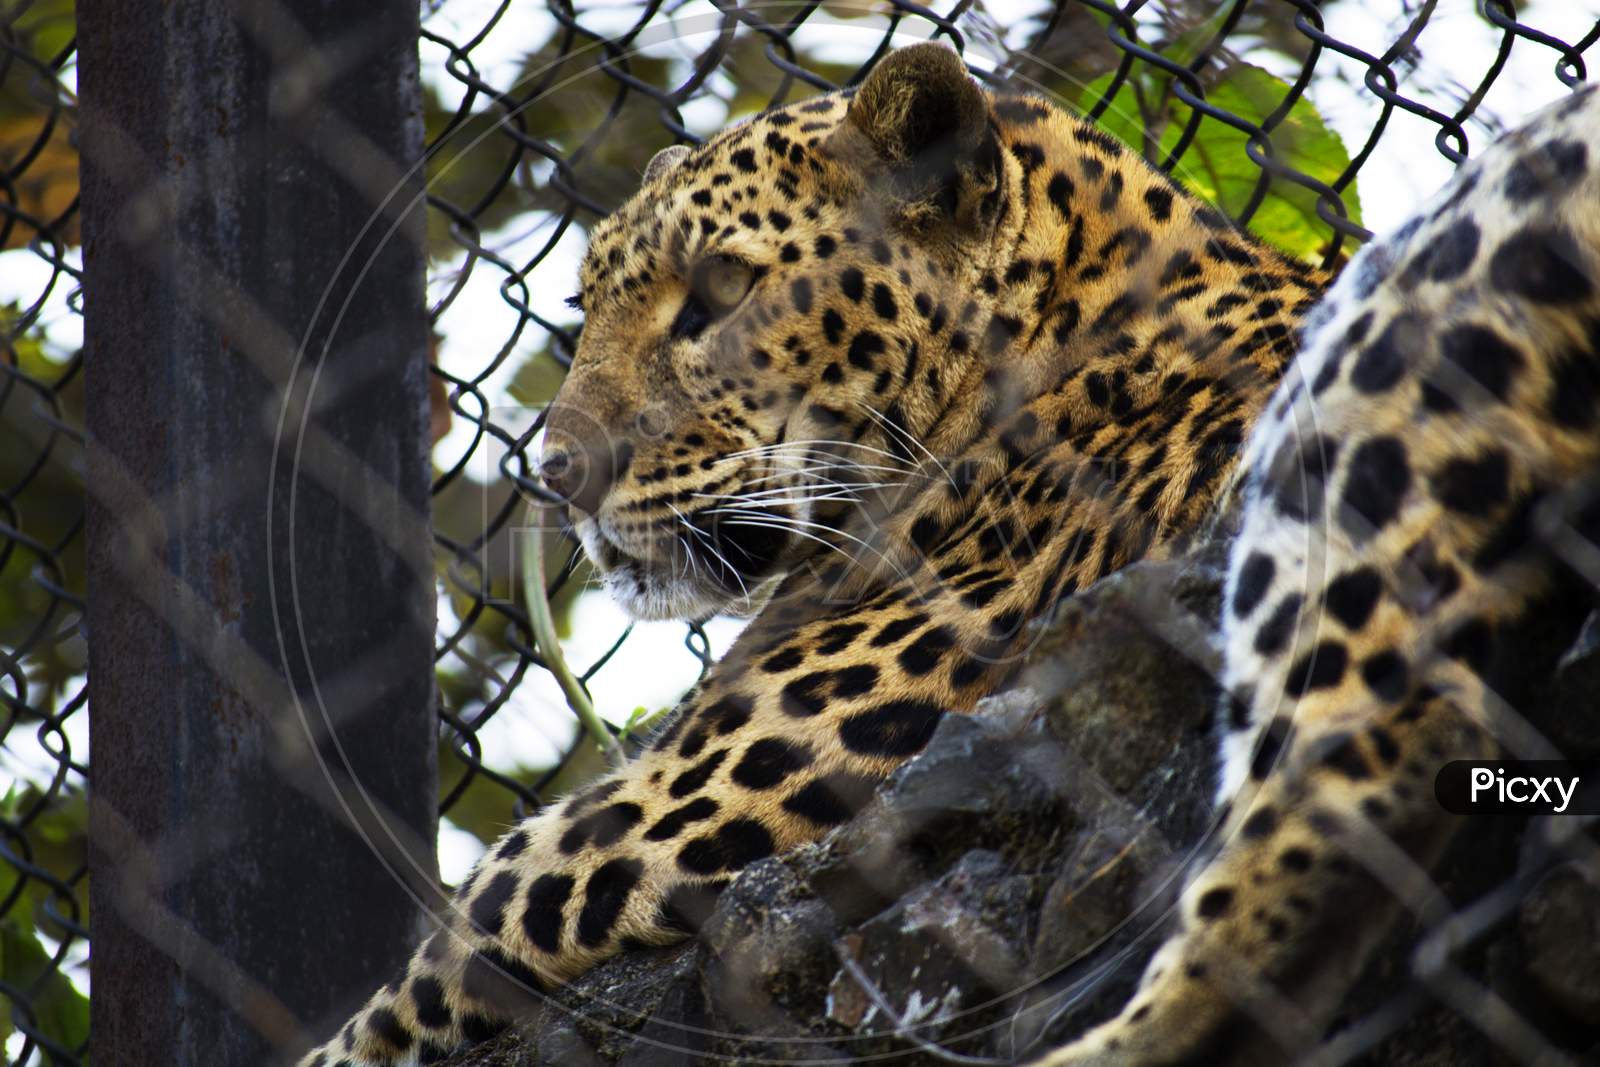 A Cheetah In a Cage